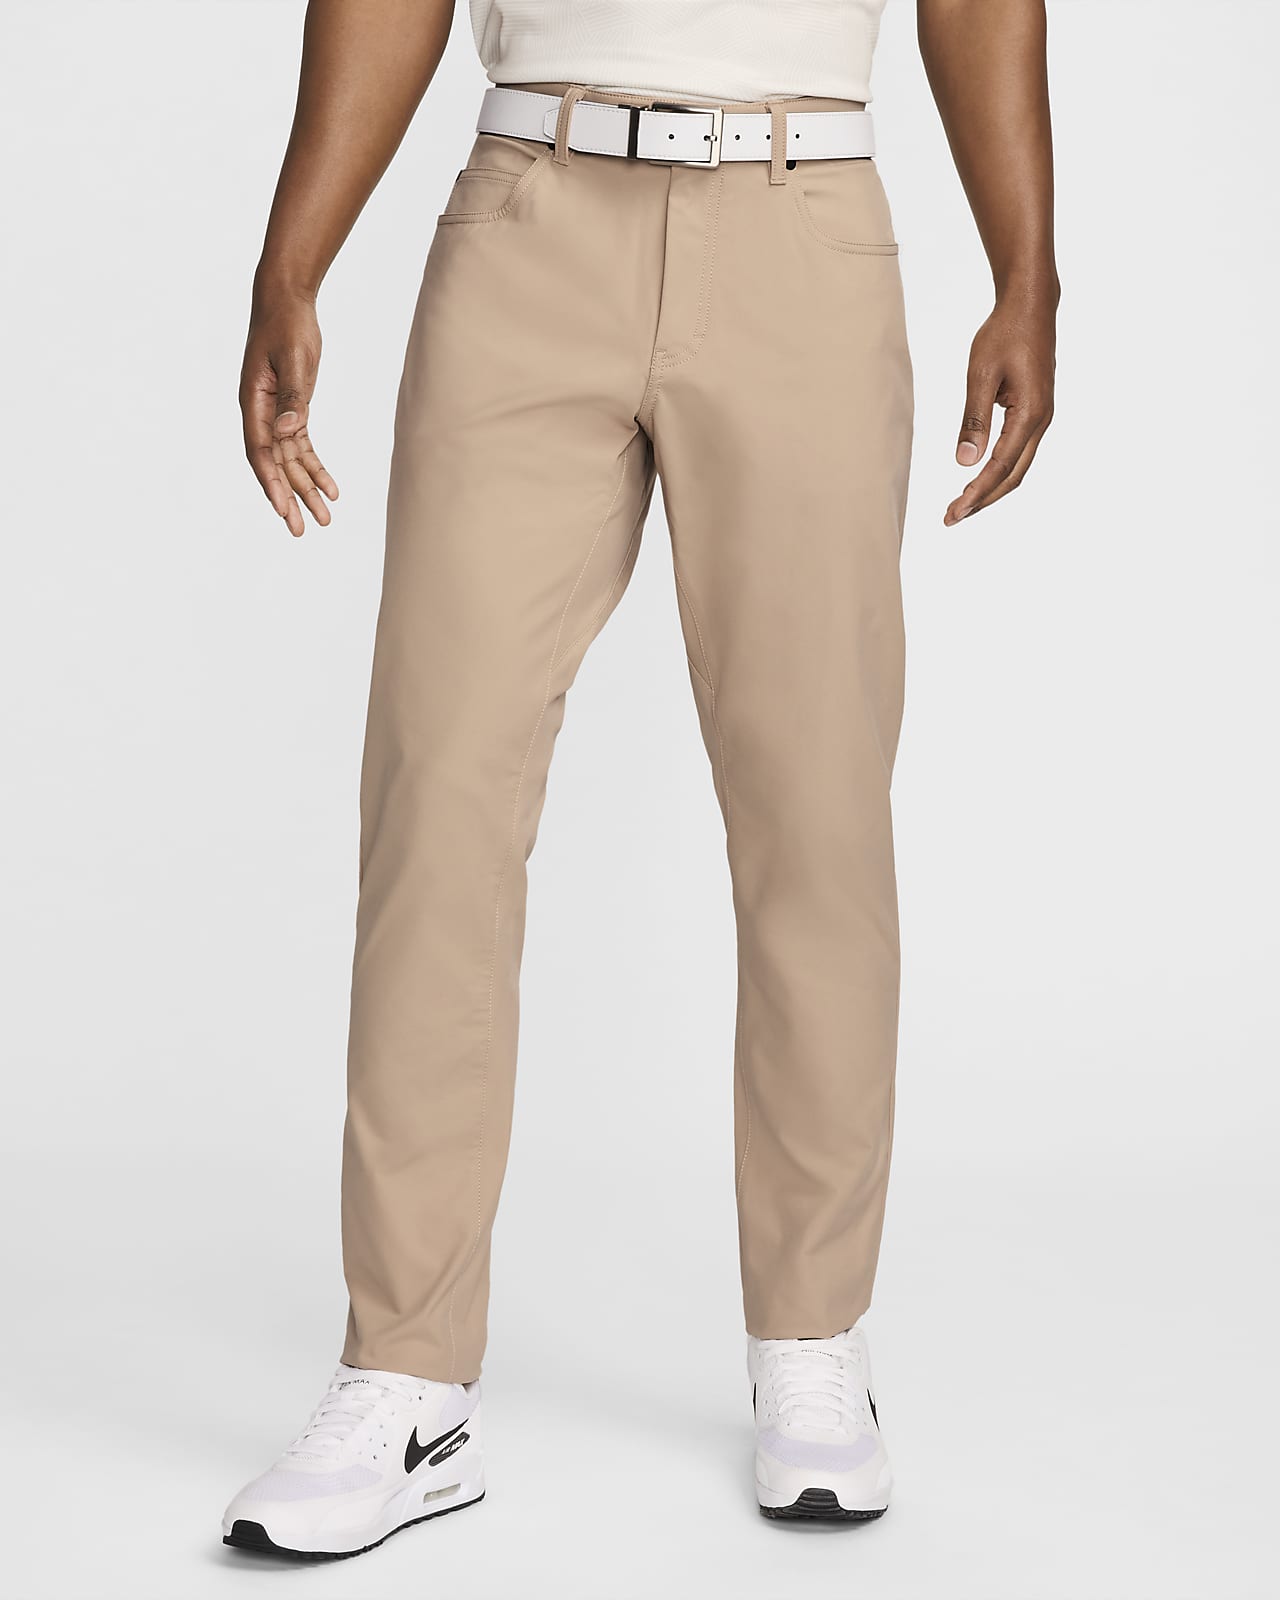 Nike Golf Trousers  Pants, Premium Golf Clothing, New Collection Online -  Clubhouse Golf